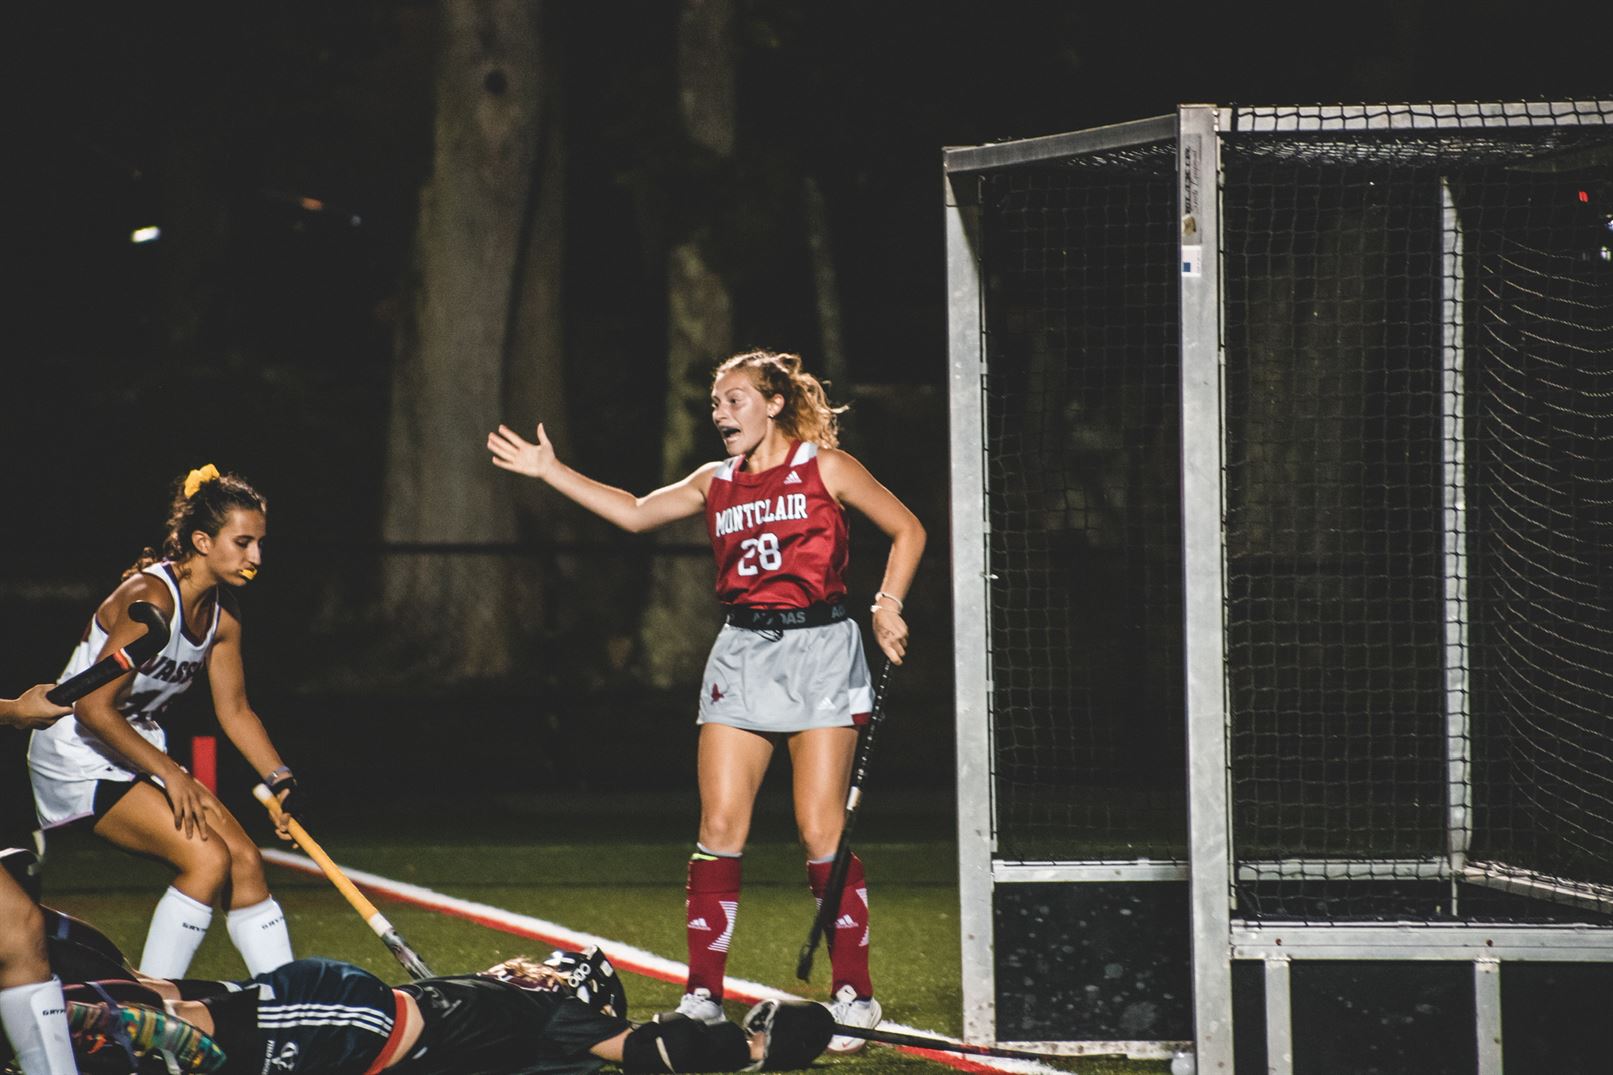 Carlie Van Tassel was all ecstatic as she scored the first goal of the game. Dan Dreisbach | The Montclarion